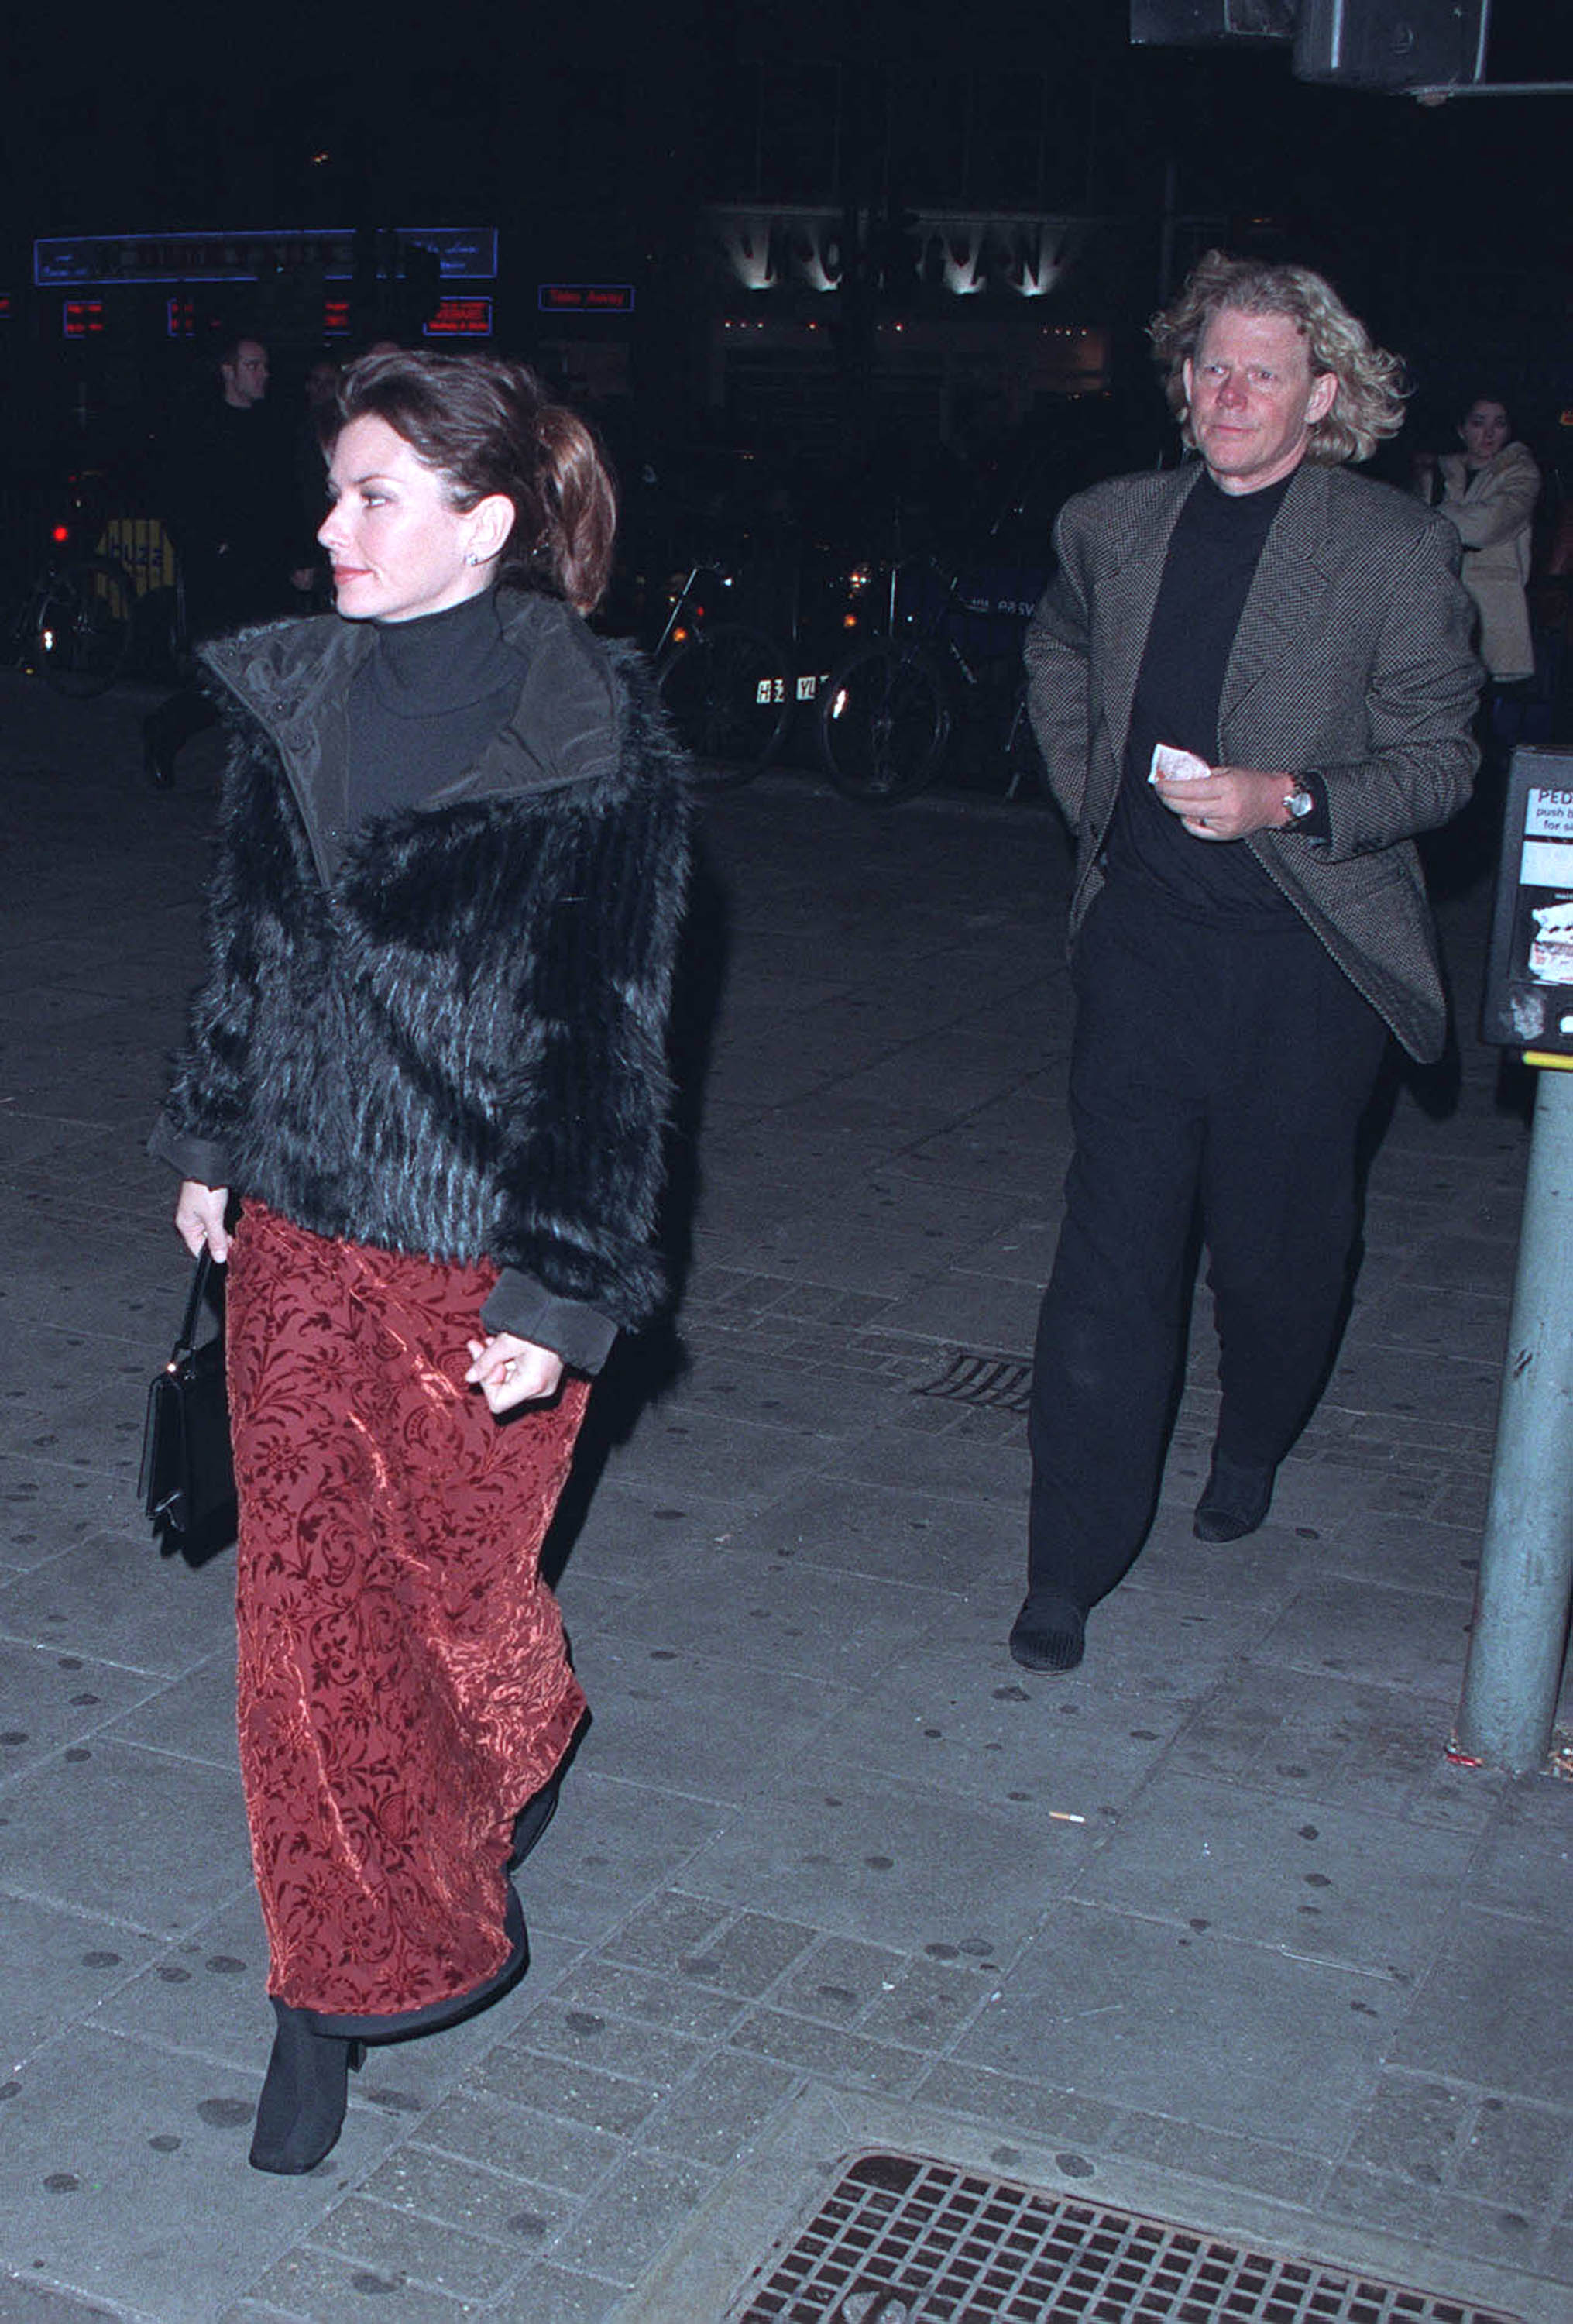 Shania Twain and Robert John 'Mutt' Lange attending a performance of Swan Lake at the Dominion Theatre in London West End in February 2000.